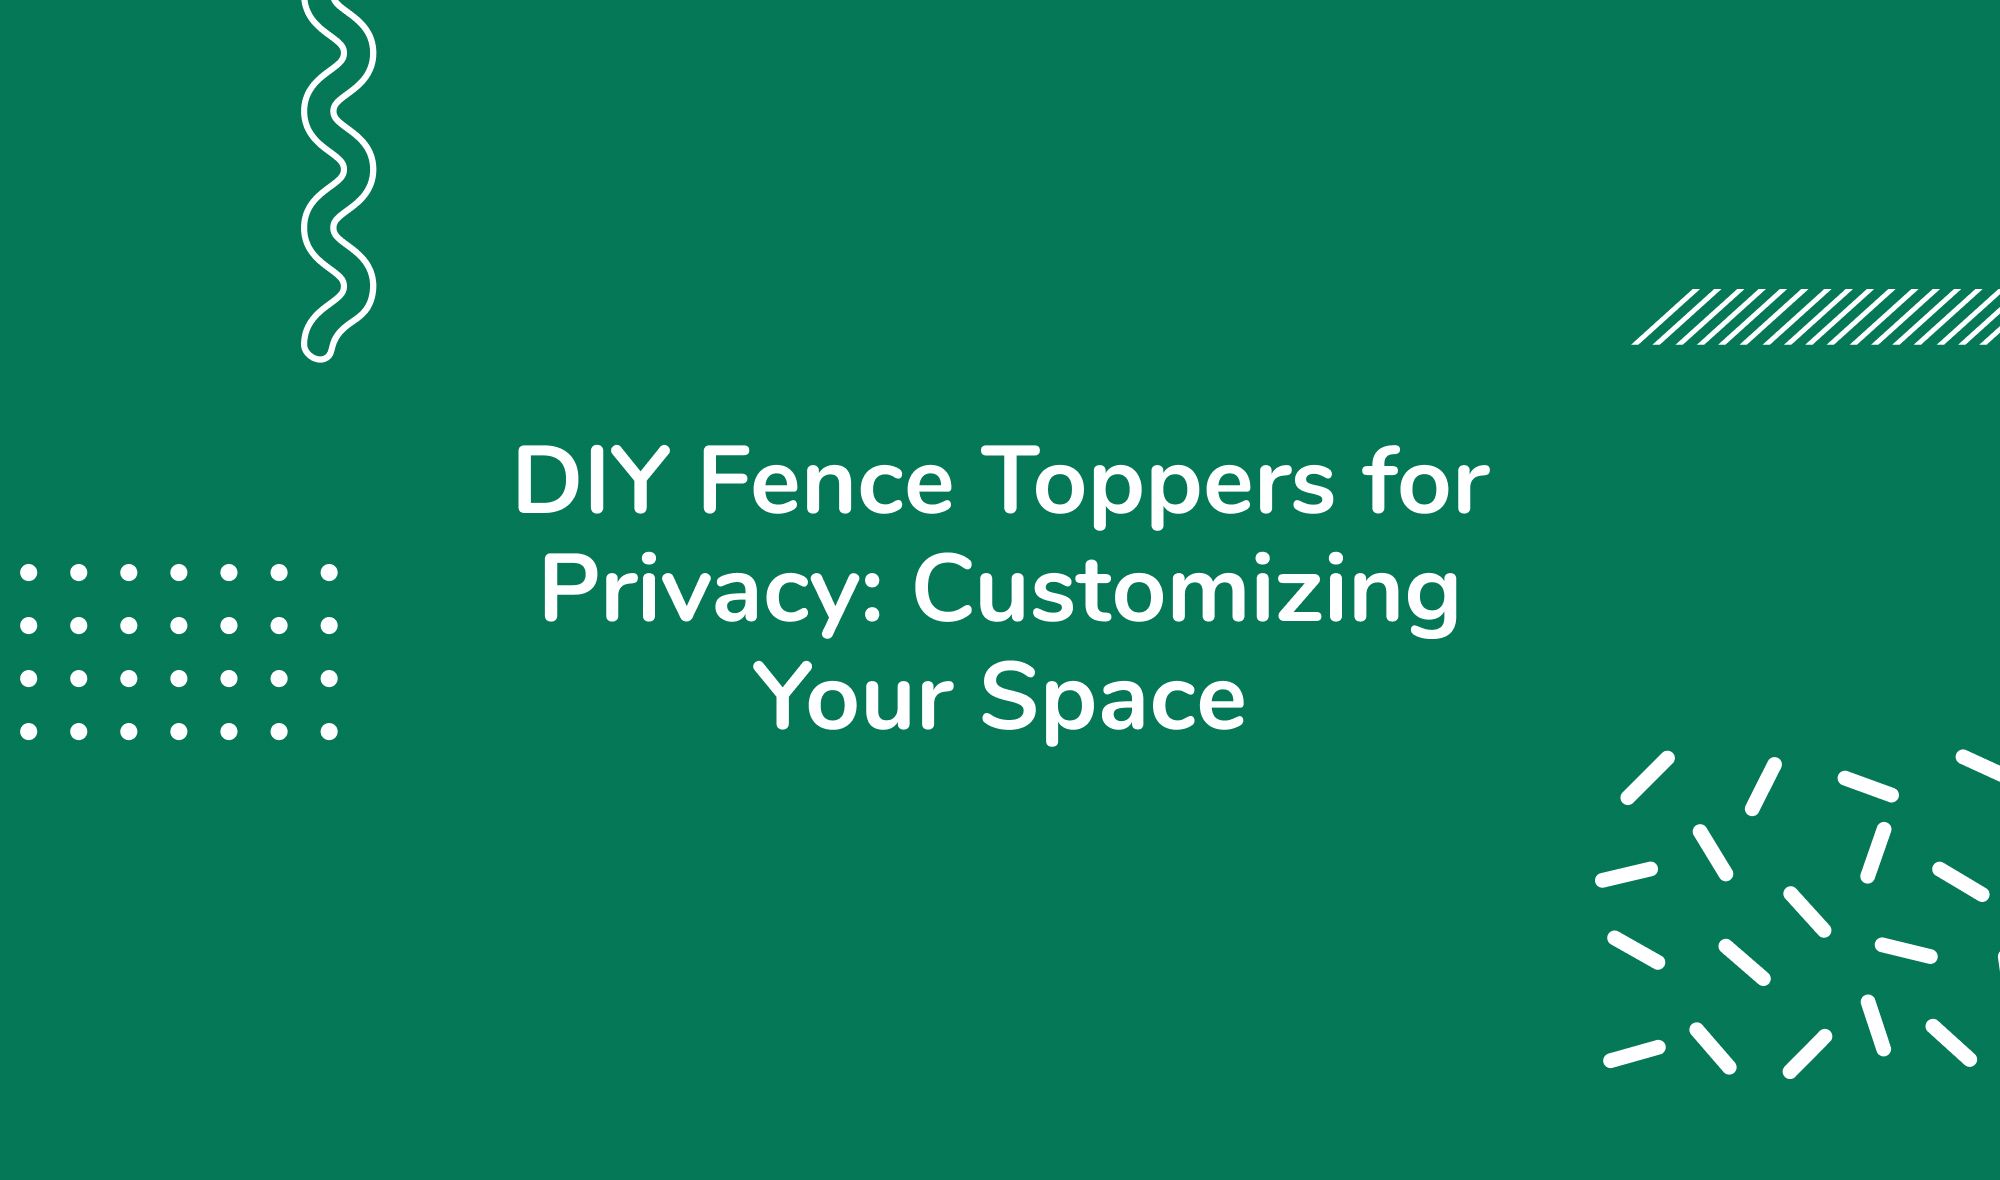 DIY Fence Toppers for Privacy: Customizing Your Space